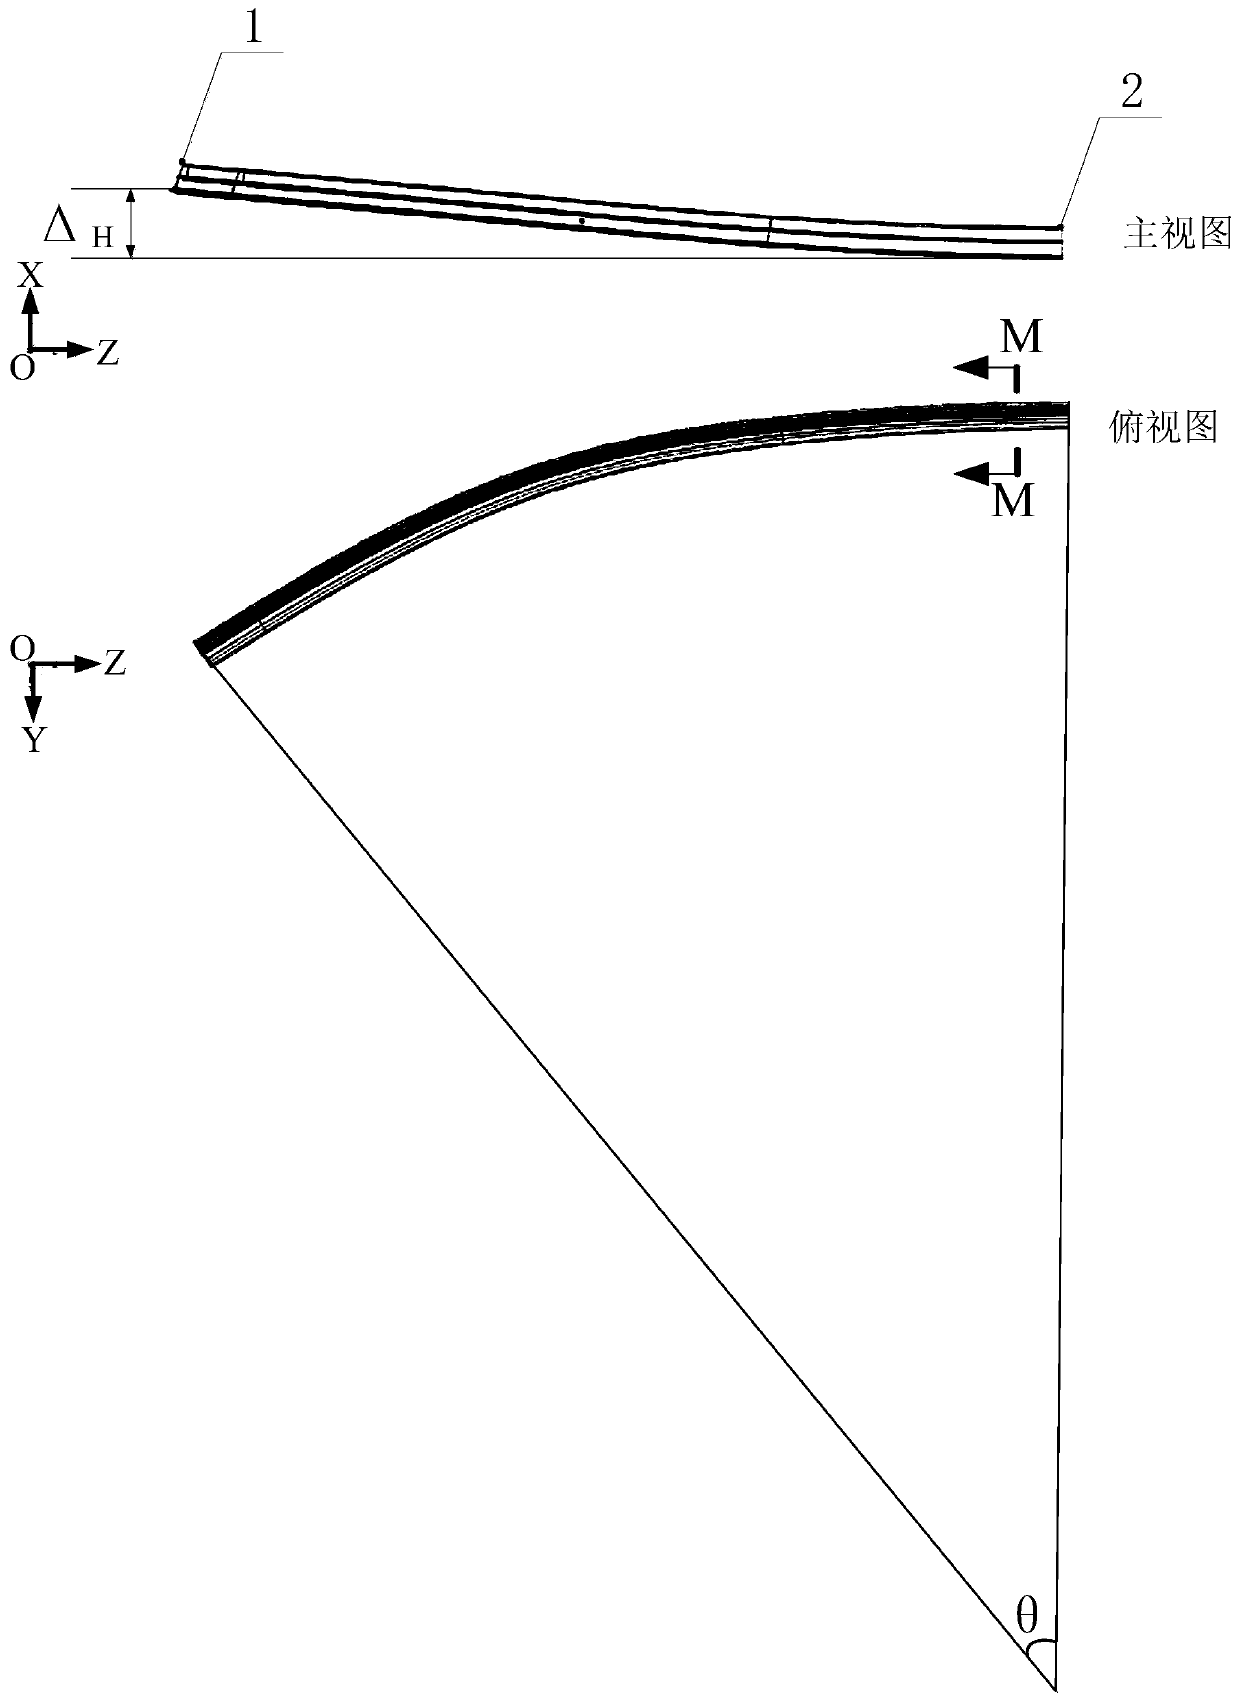 A Prediction, Evaluation and Optimization Method for 3D Stretch Bending Formability of Profiles